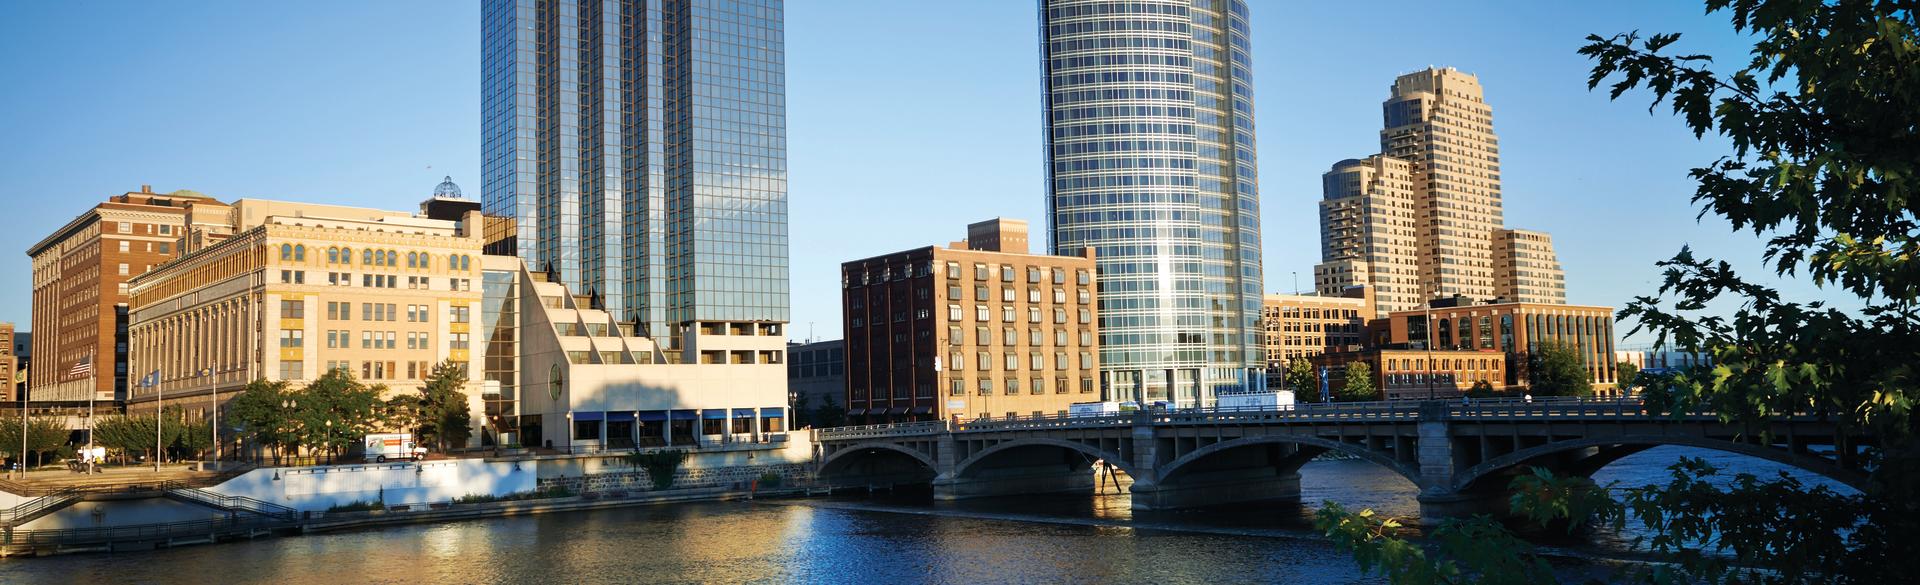 Grand Rapids venues and hotels focus on reducing the amount of waste going to the landfill, among other sustainability efforts.